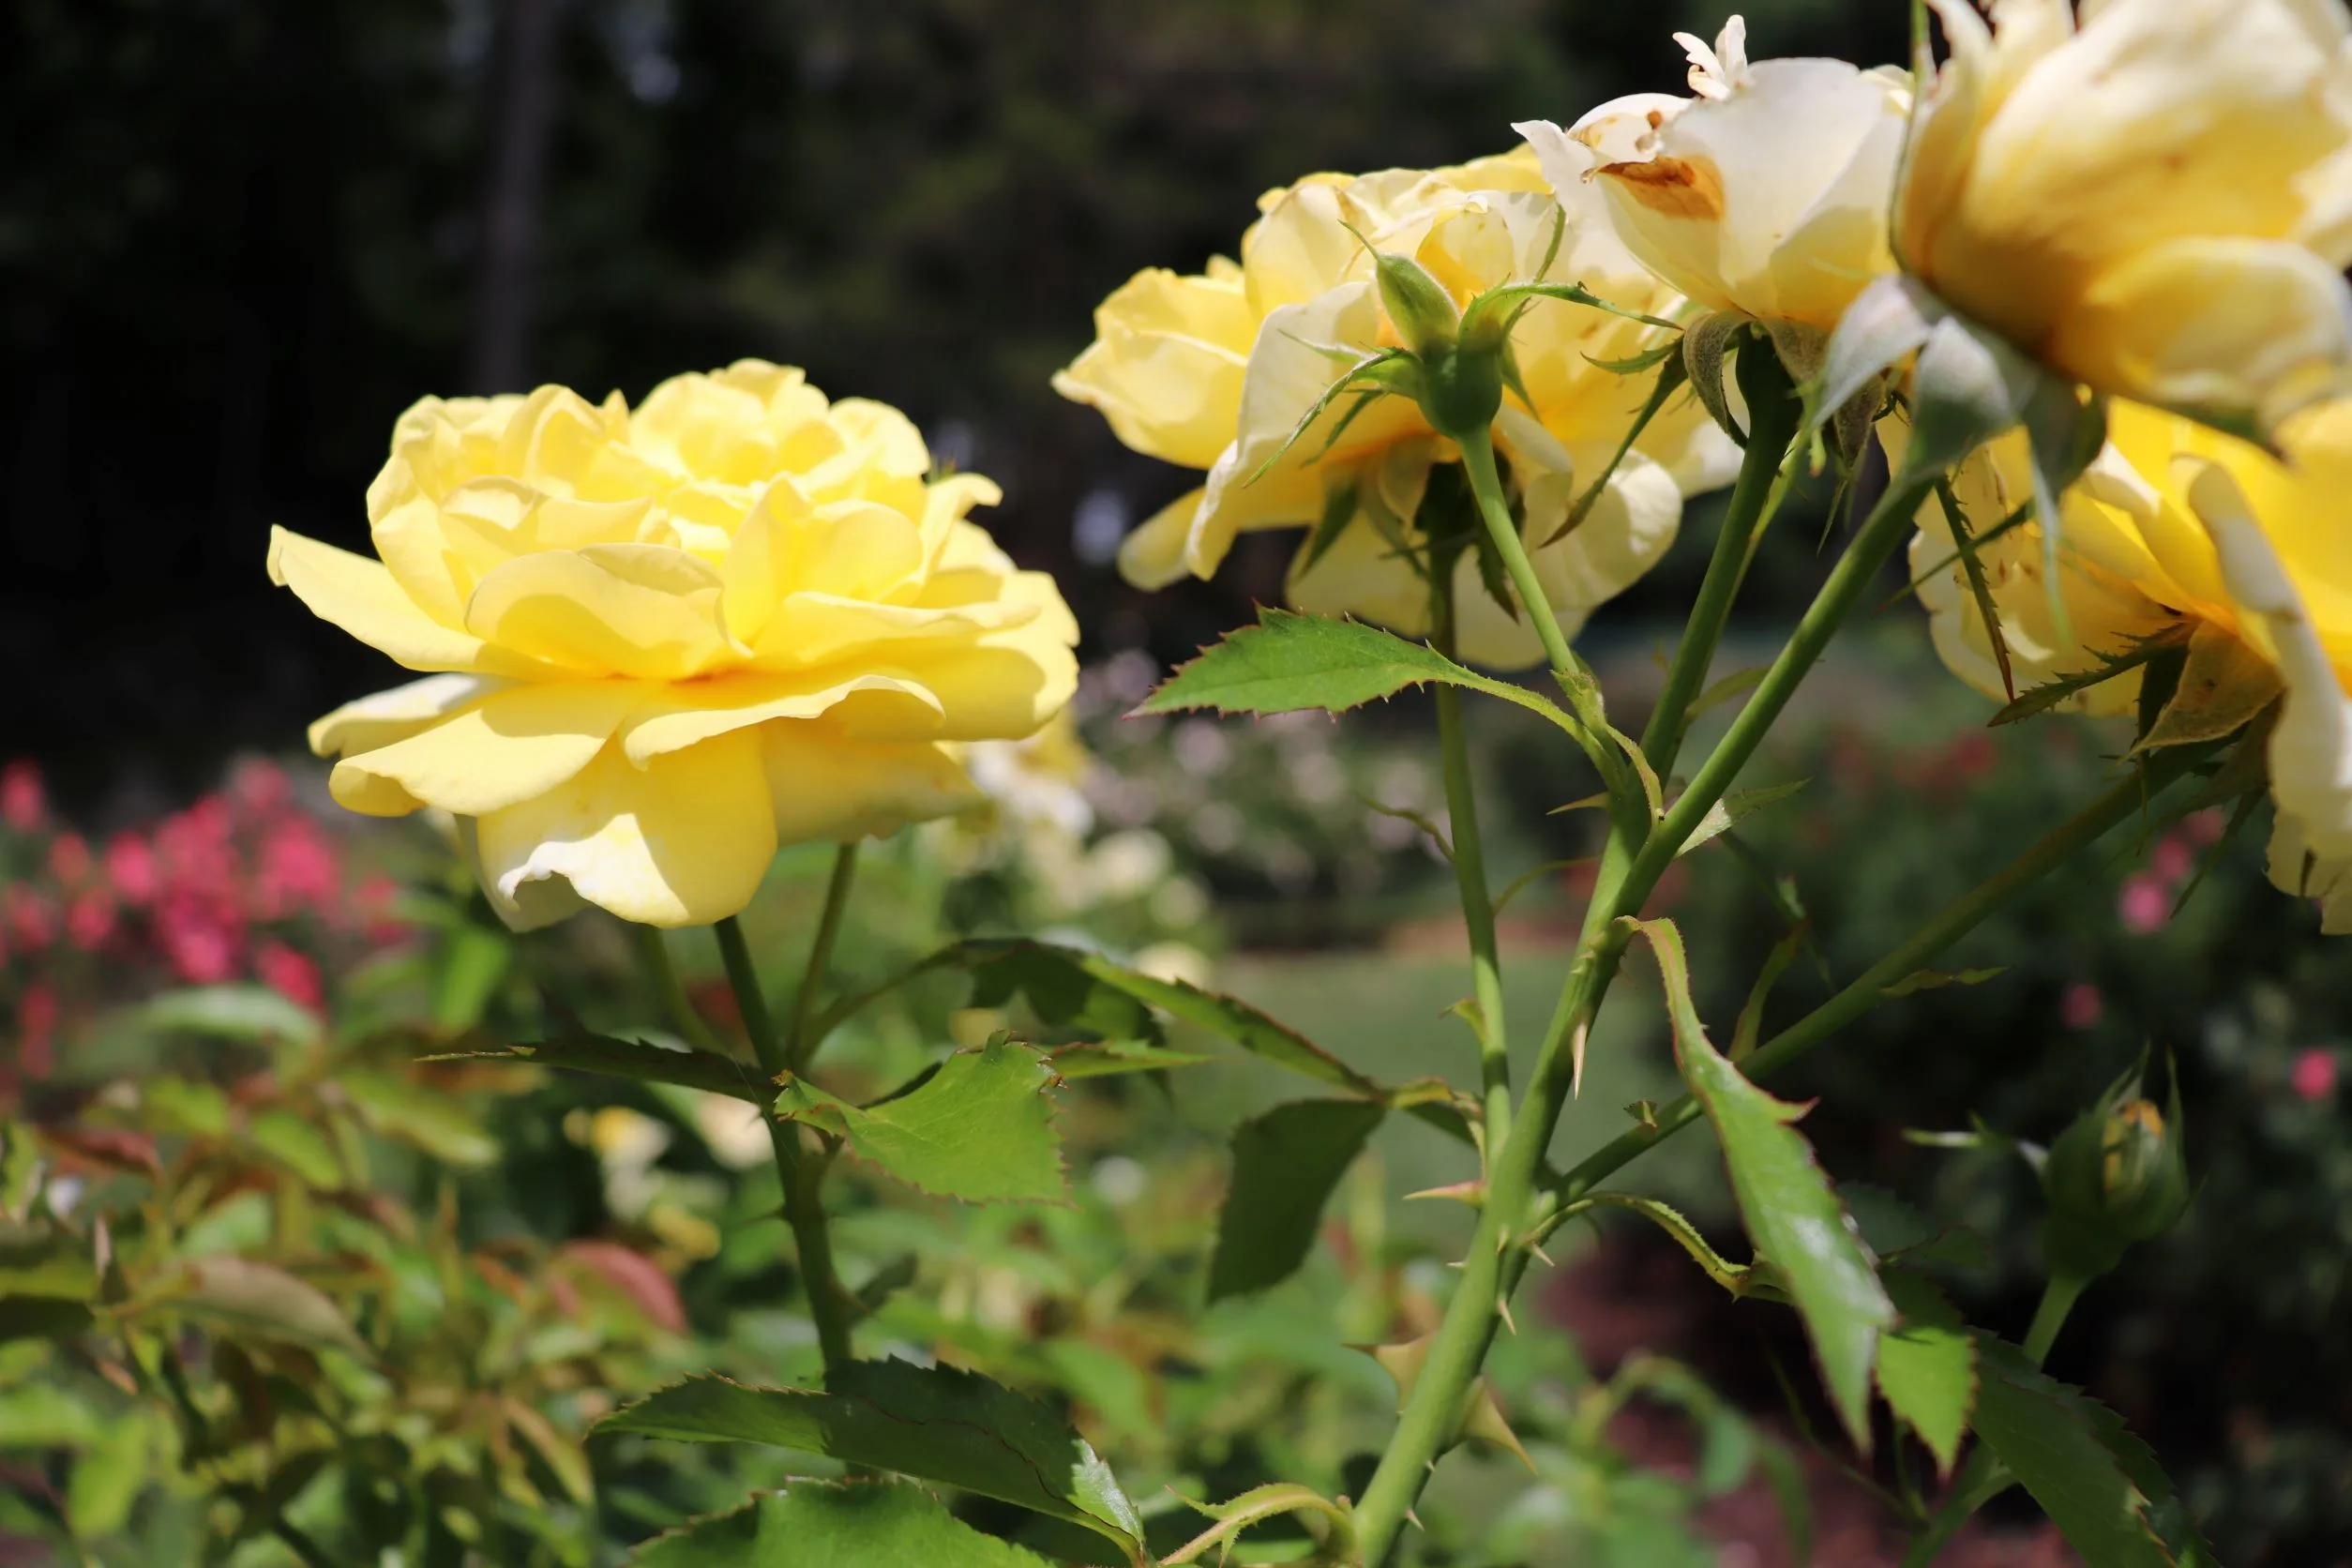 image of yellow rose close up in norwich rose garden.